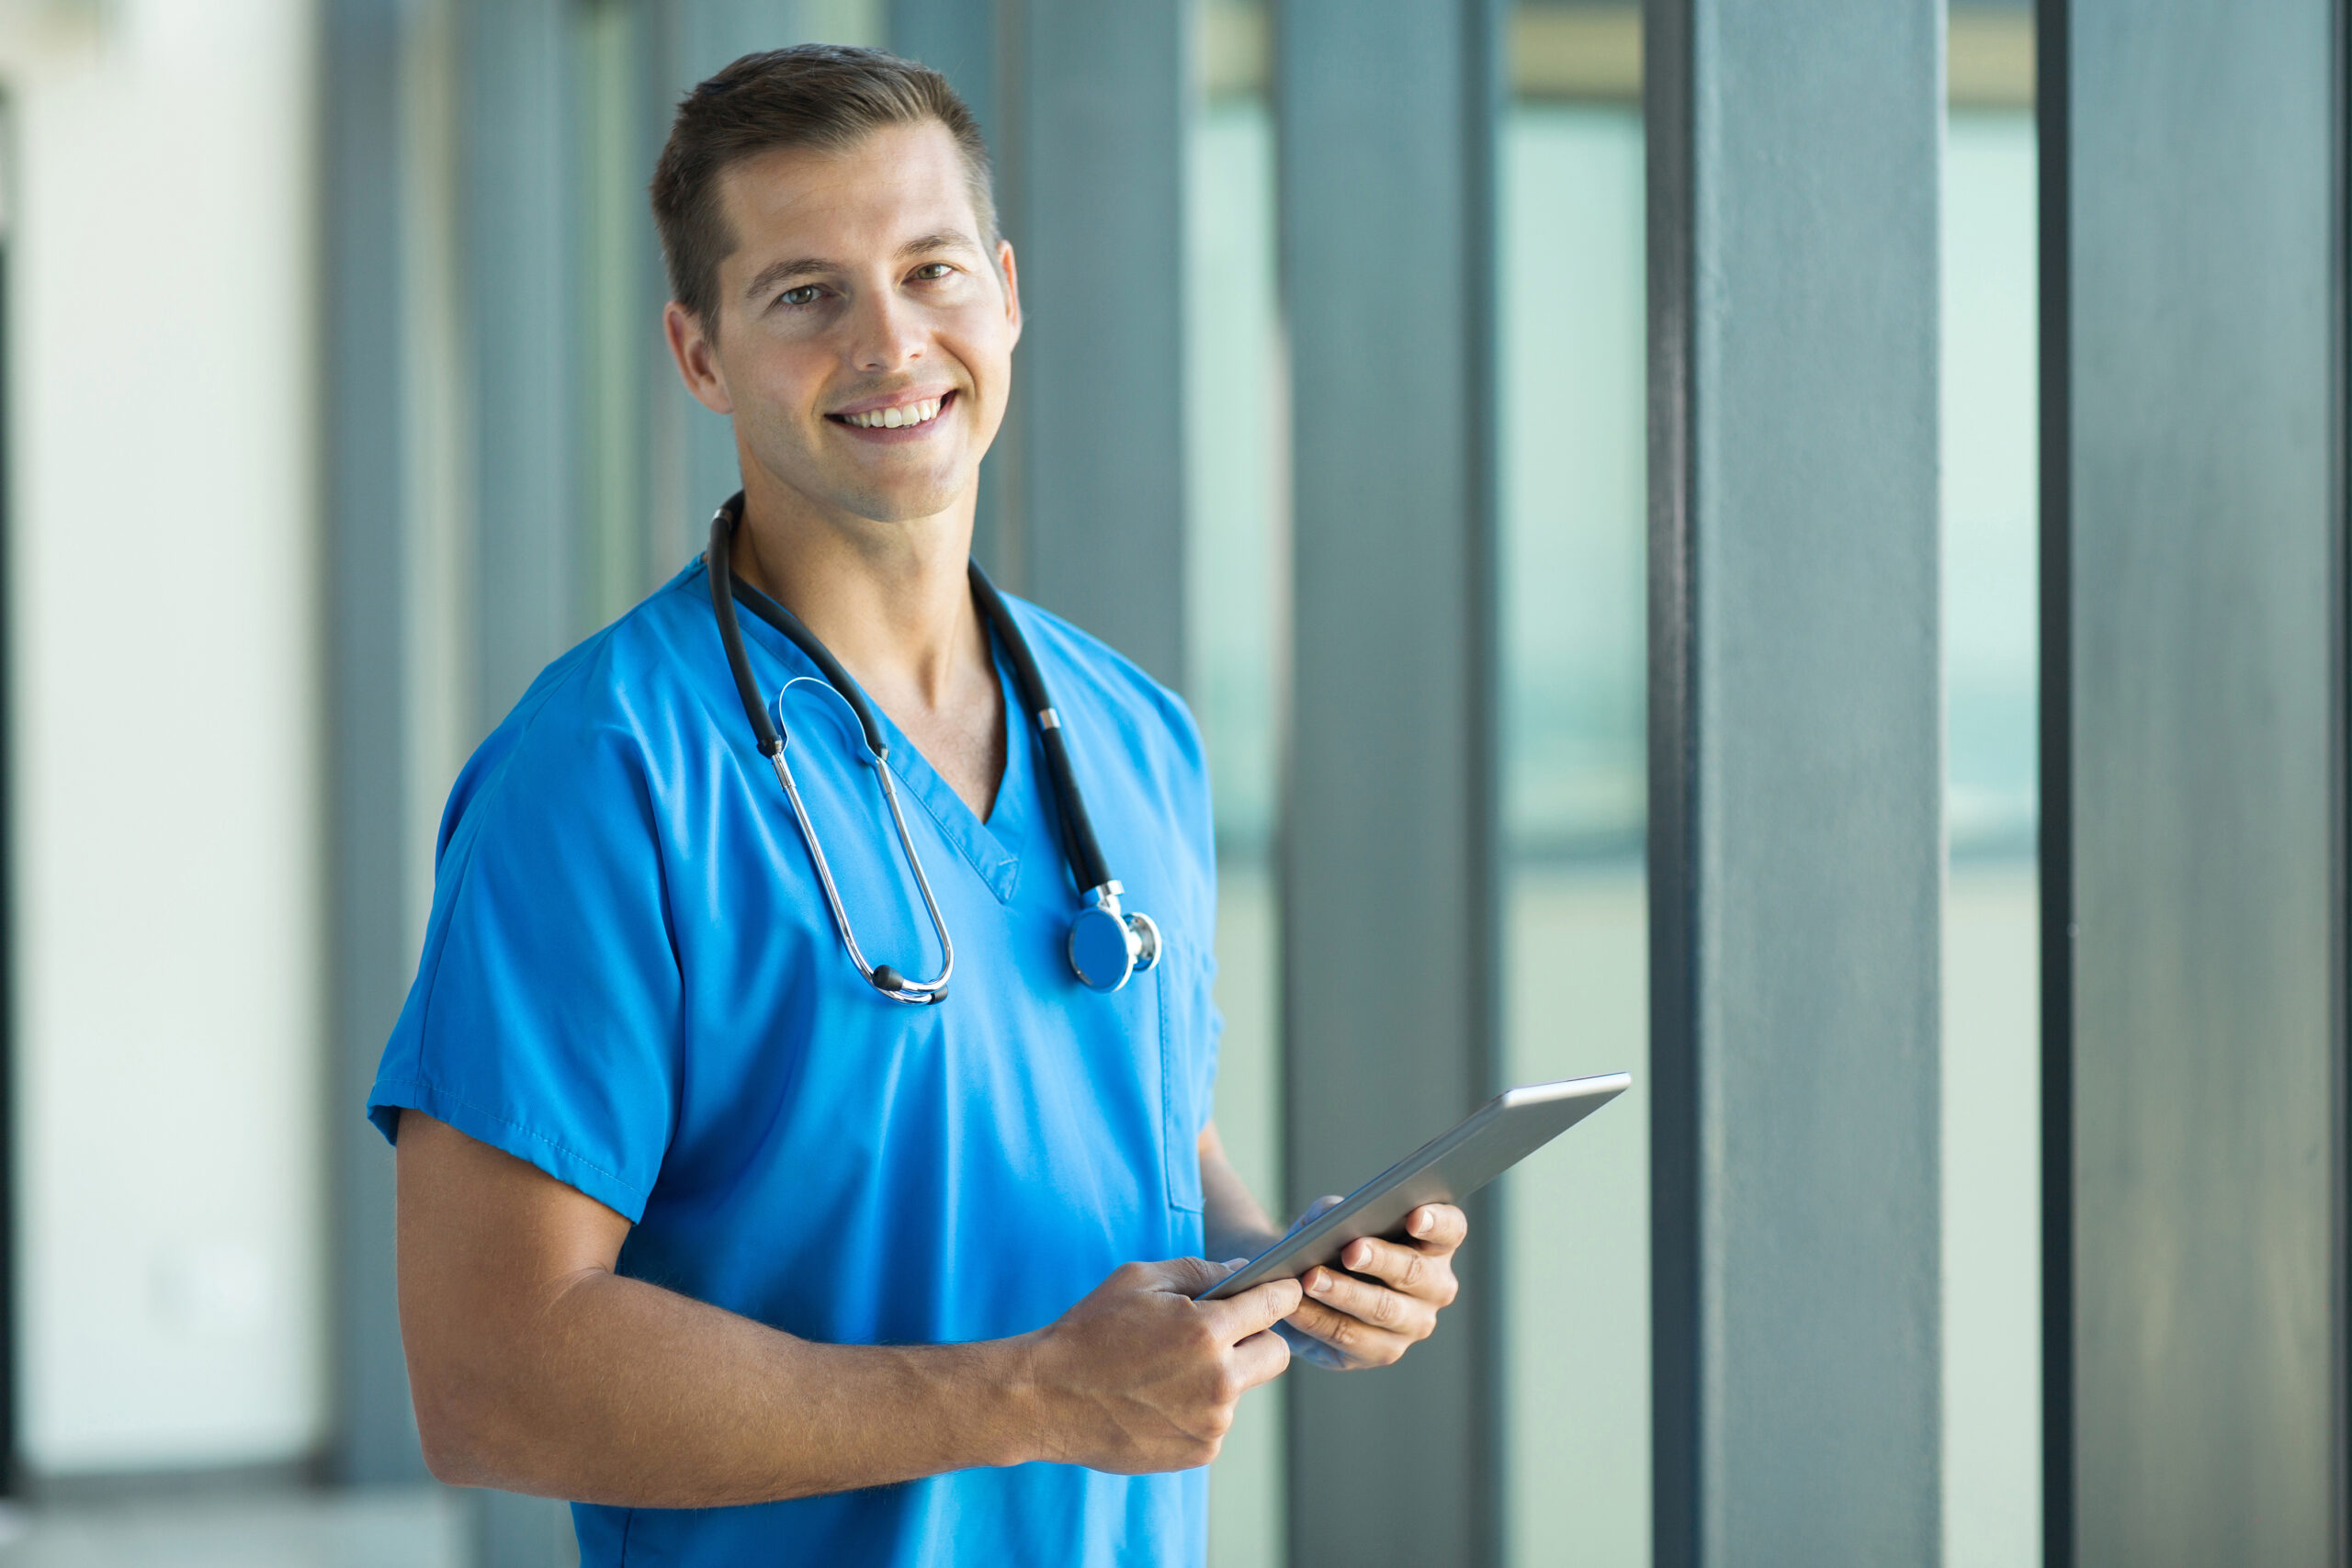 Male doctor in blue scrubs, tablet in hand, ready to care for patients